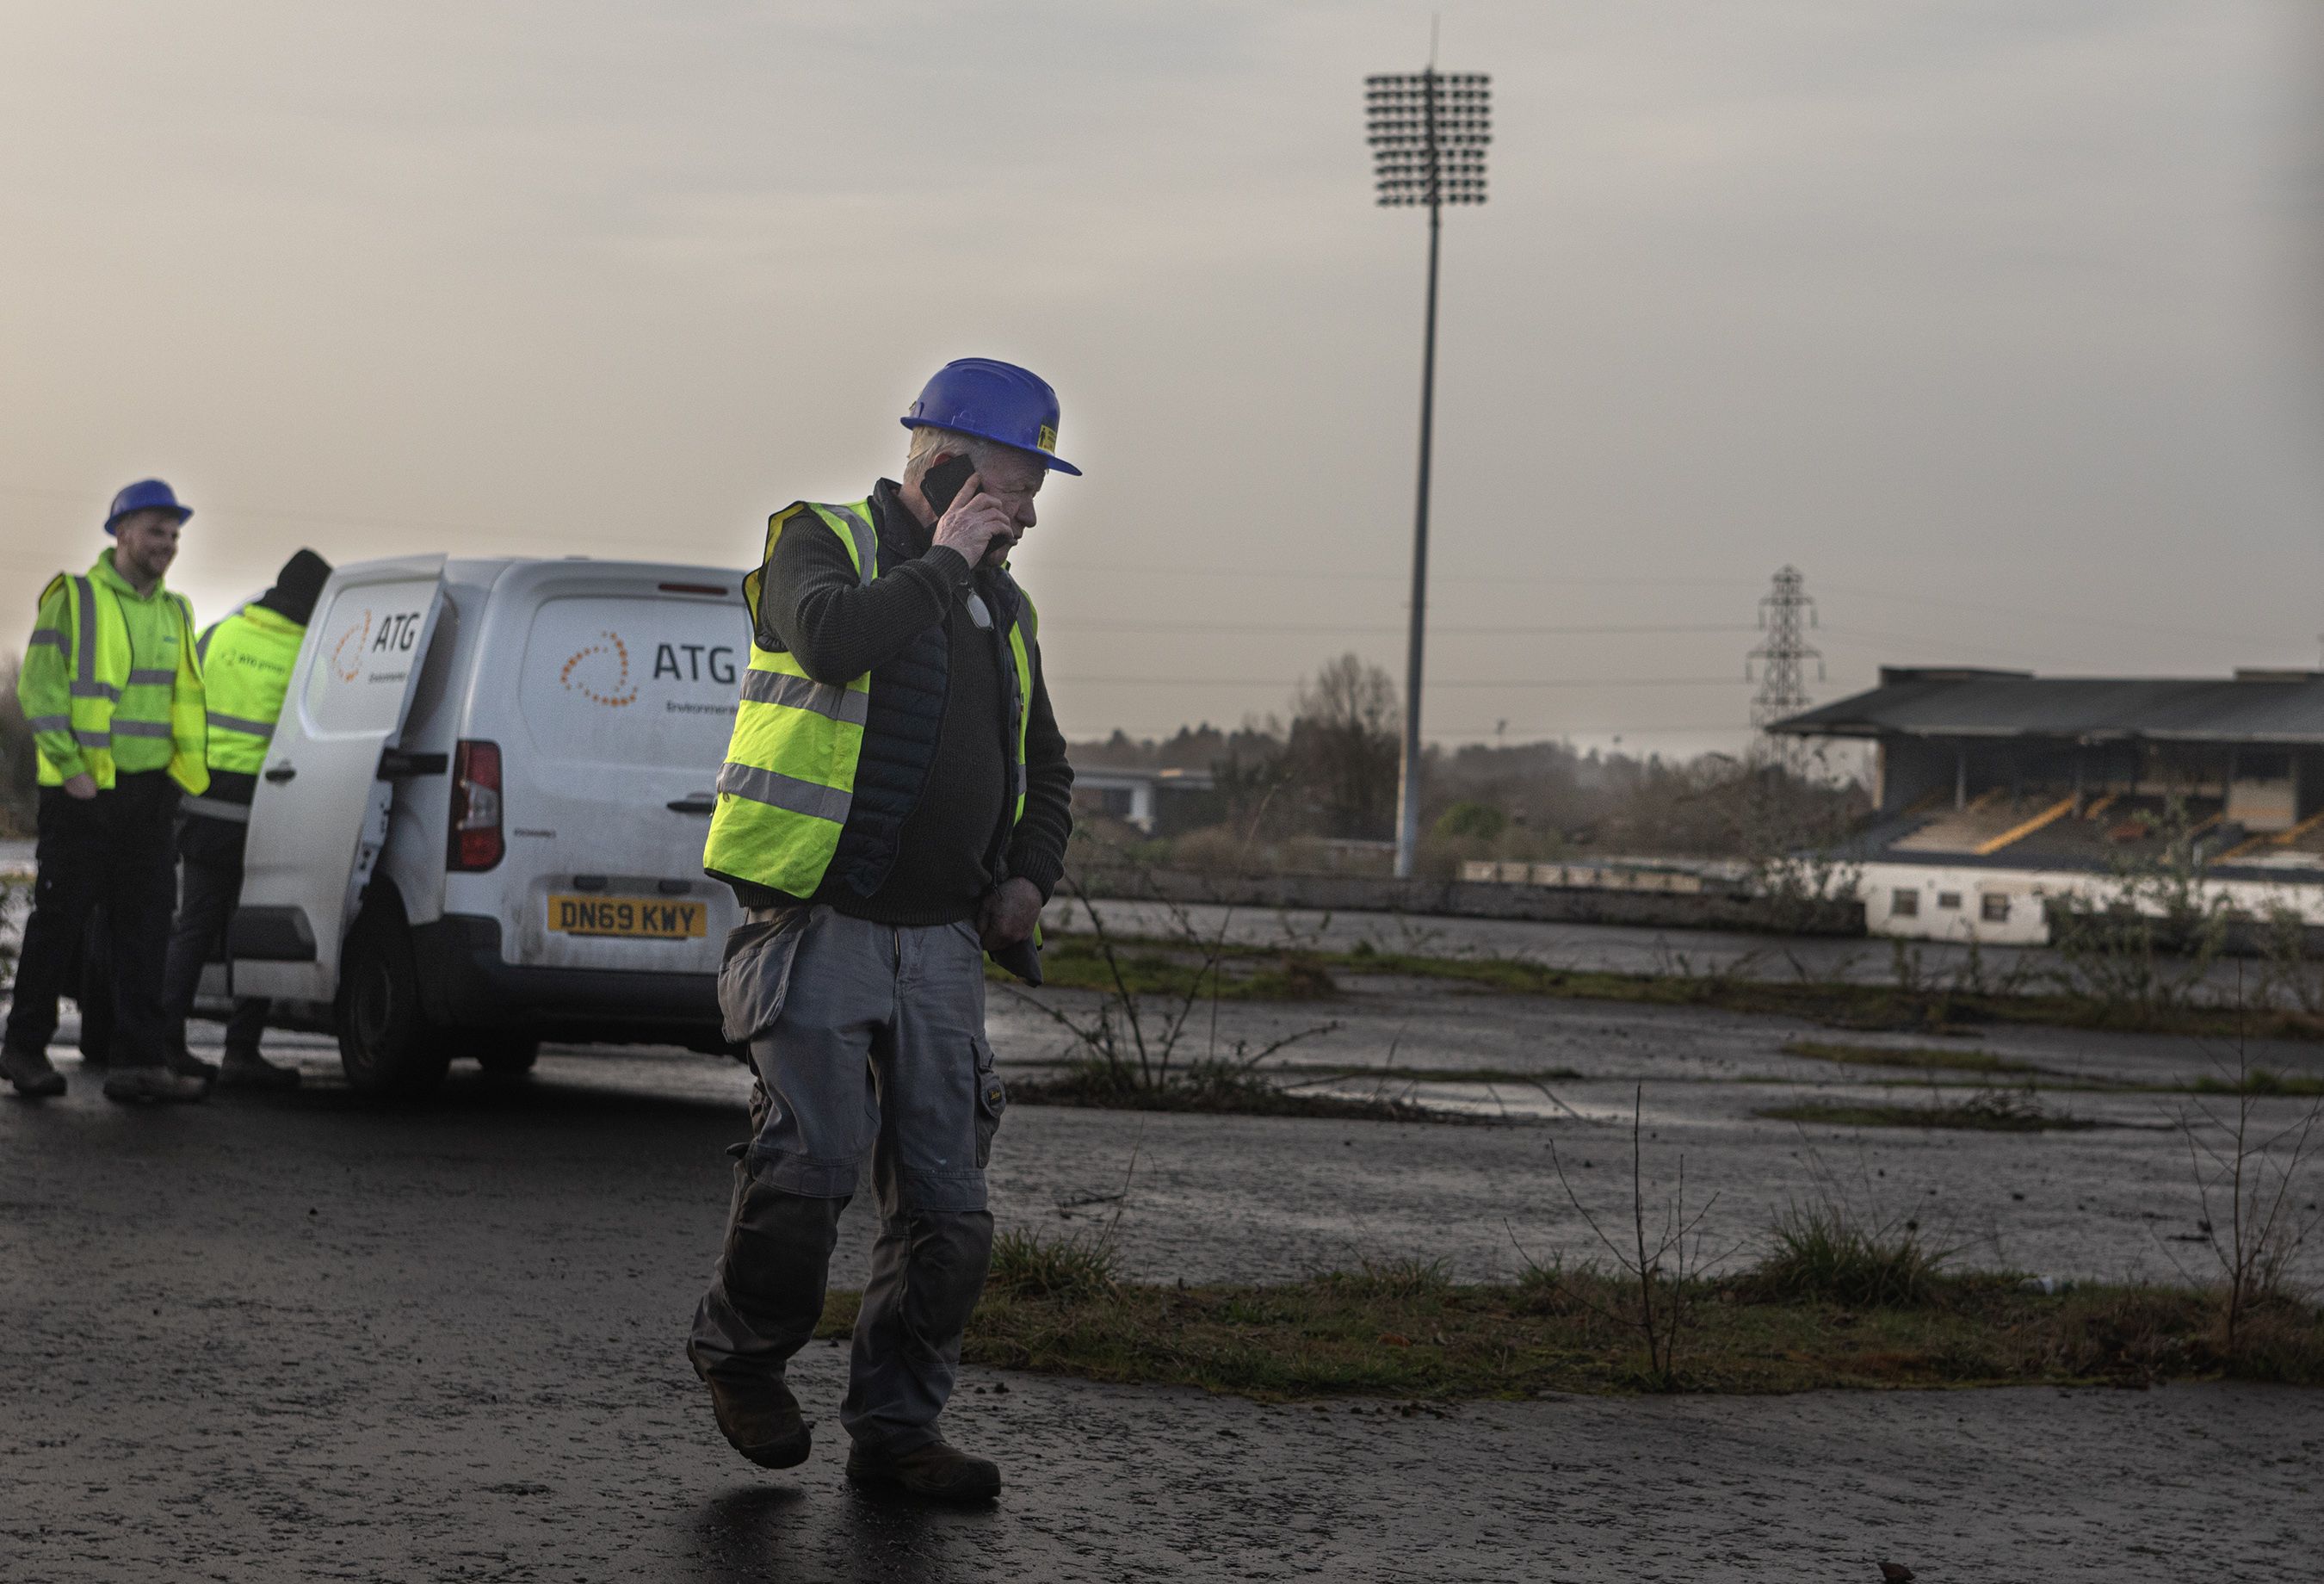 STADIUM: Preliminary work started on Casement Park on Monday. Now the Irish government has pledged €50million to the project